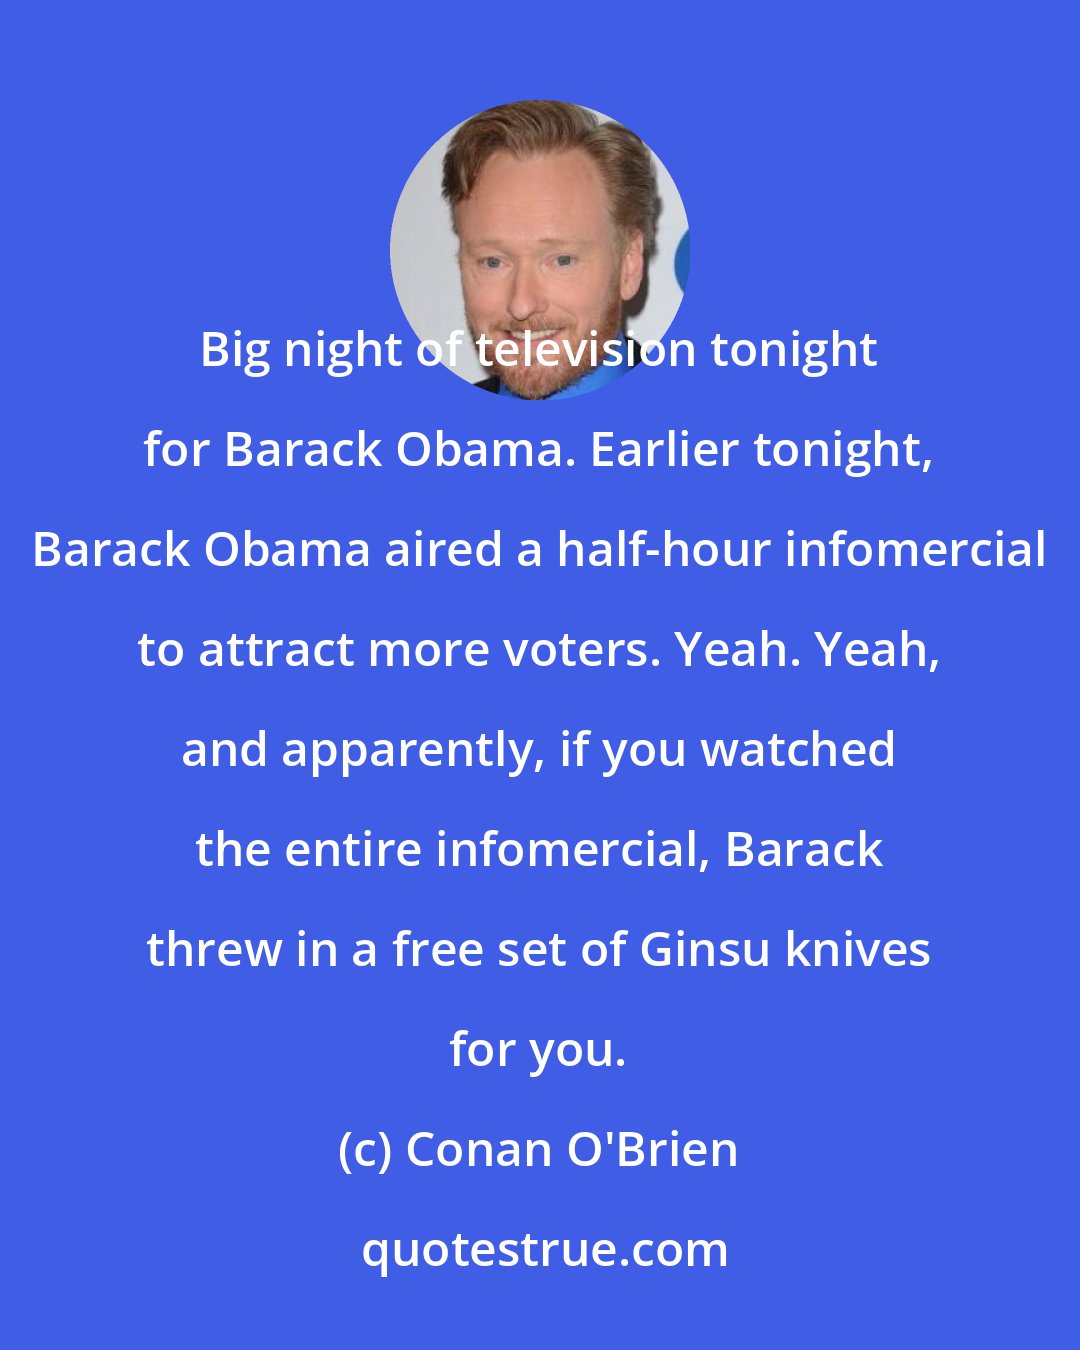 Conan O'Brien: Big night of television tonight for Barack Obama. Earlier tonight, Barack Obama aired a half-hour infomercial to attract more voters. Yeah. Yeah, and apparently, if you watched the entire infomercial, Barack threw in a free set of Ginsu knives for you.